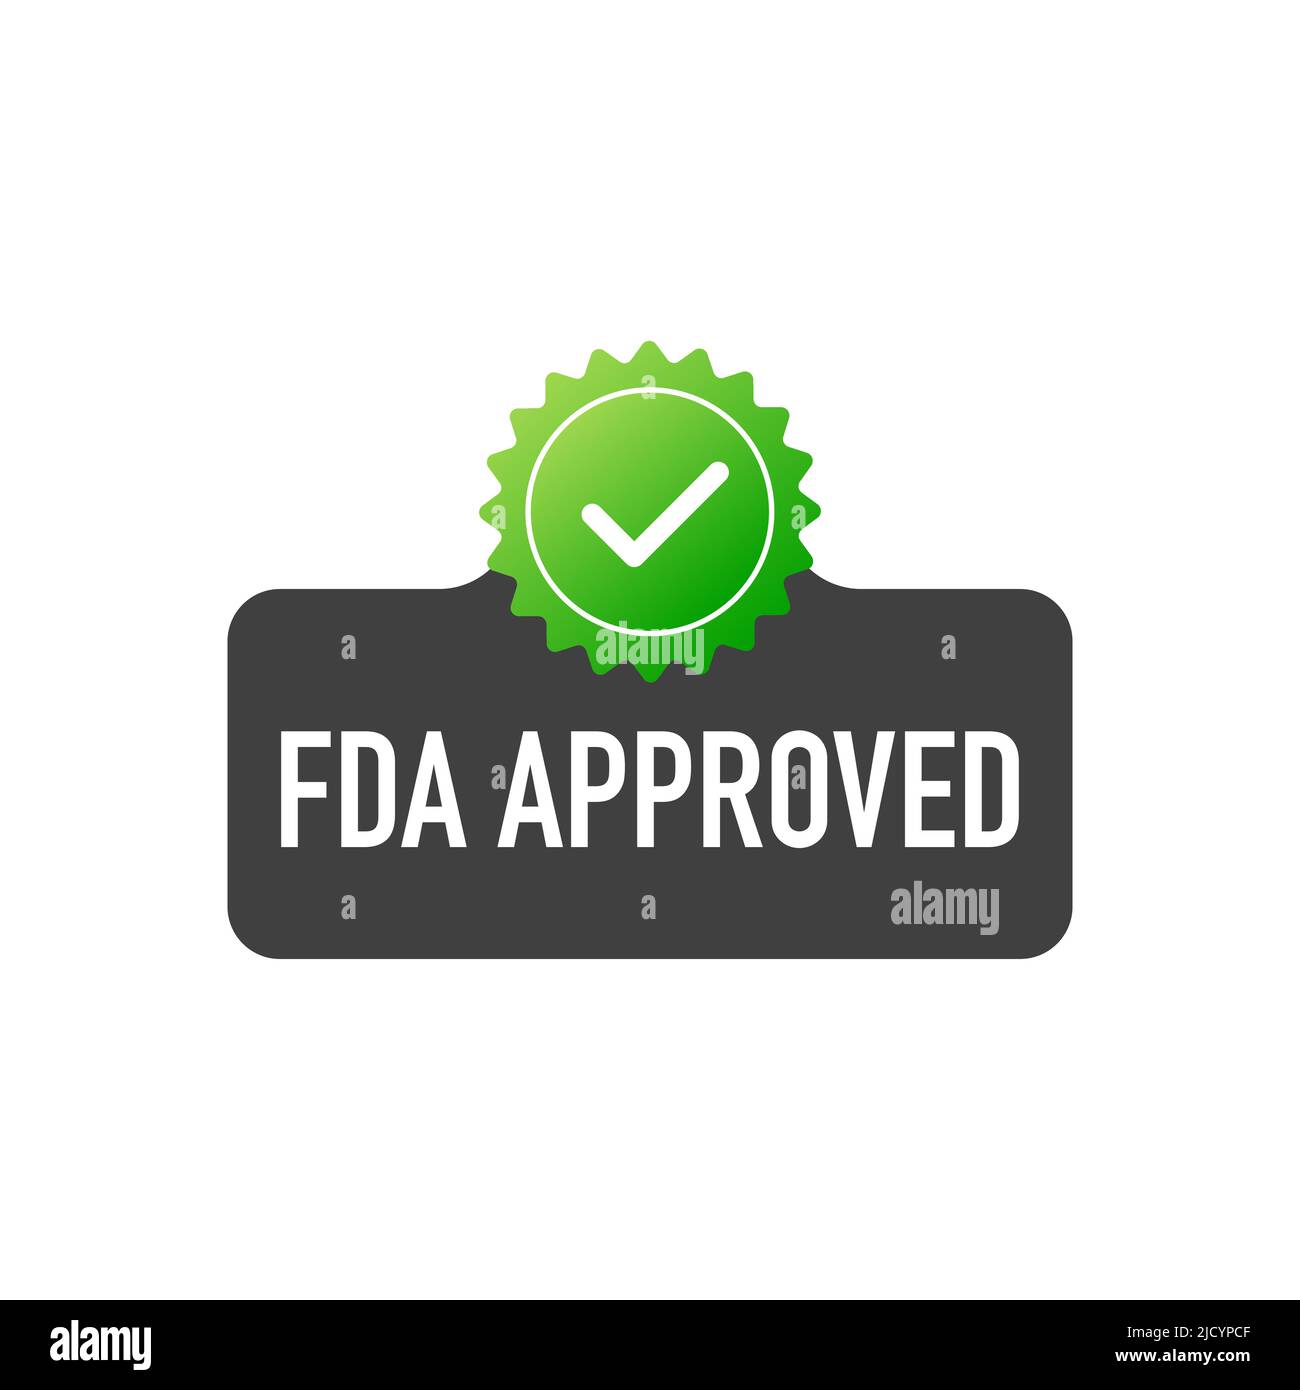 FDA approved banner design over a white background. Stock Vector